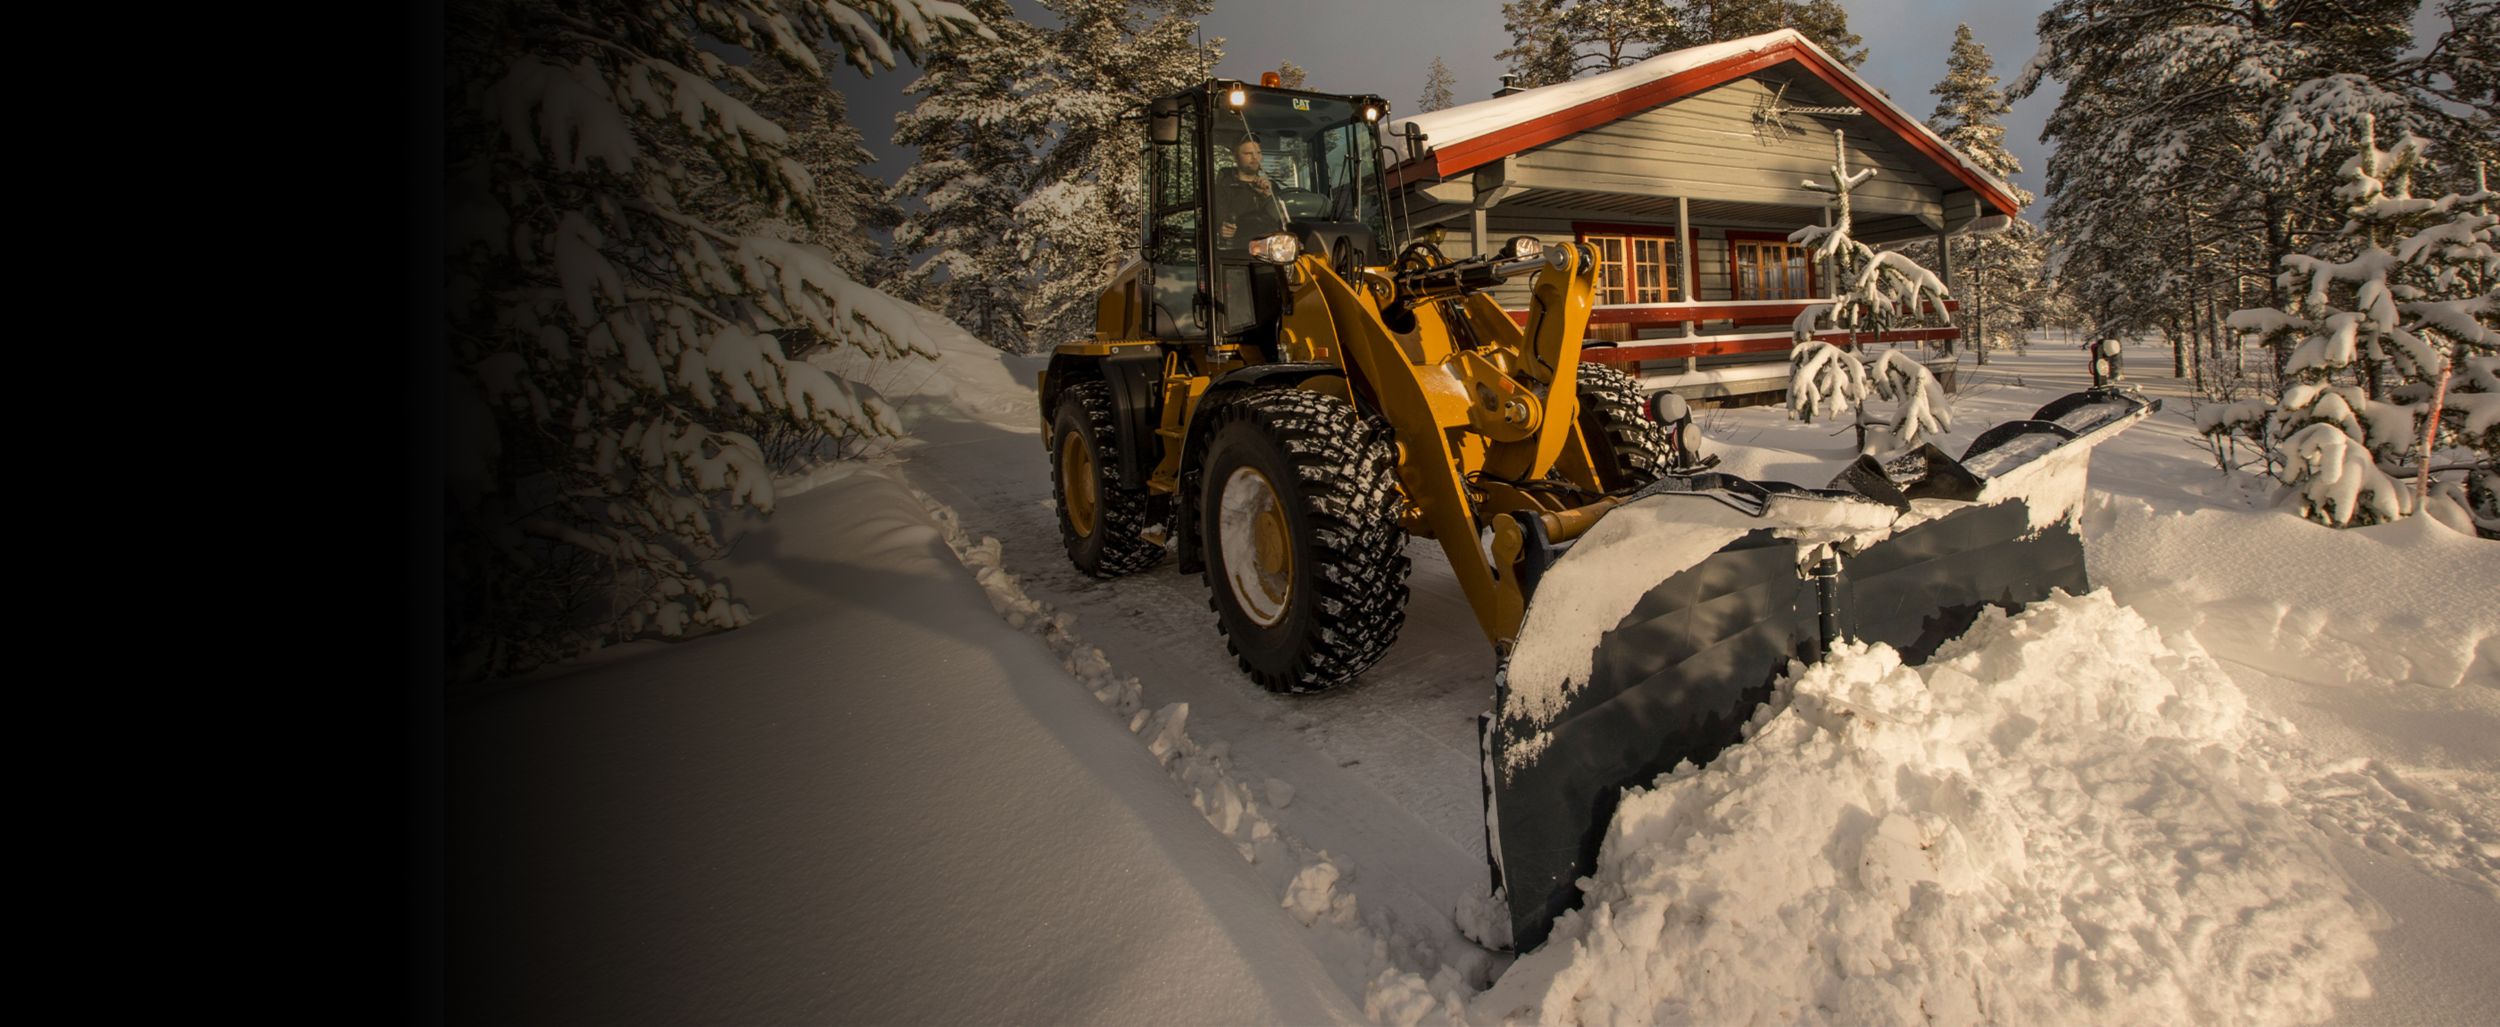 Residential vs. Commercial Snow Removal Best Practices